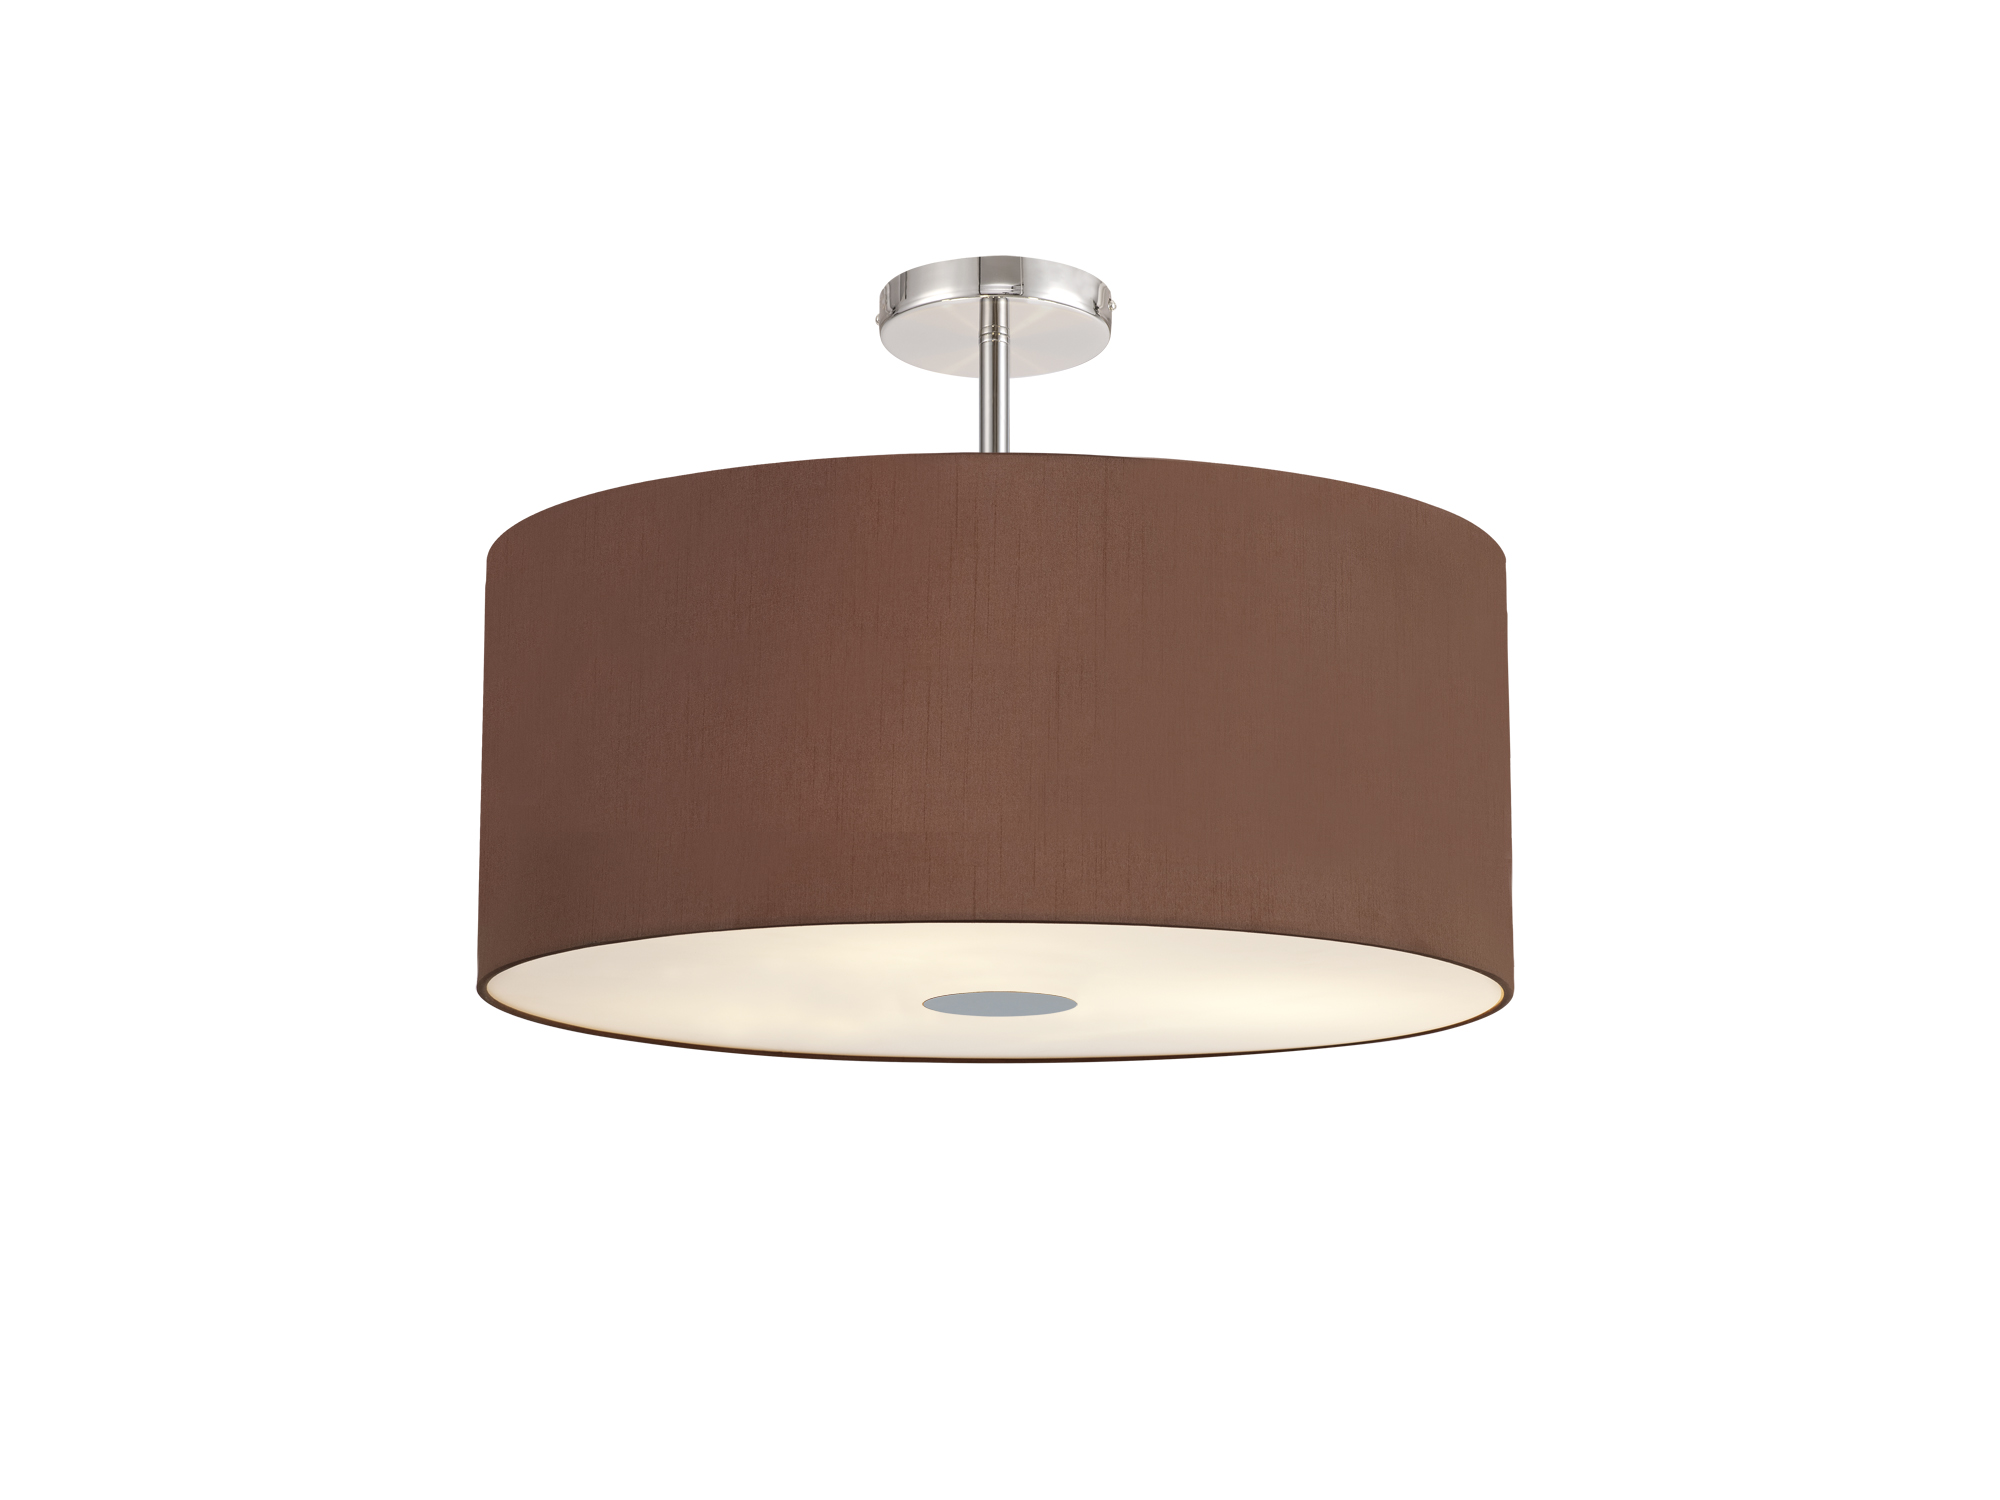 DK0492  Baymont 60cm, Drop Flush 5 Light Polished Chrome, Raw Cocoa/Grecian Bronze, Frosted Diffuser